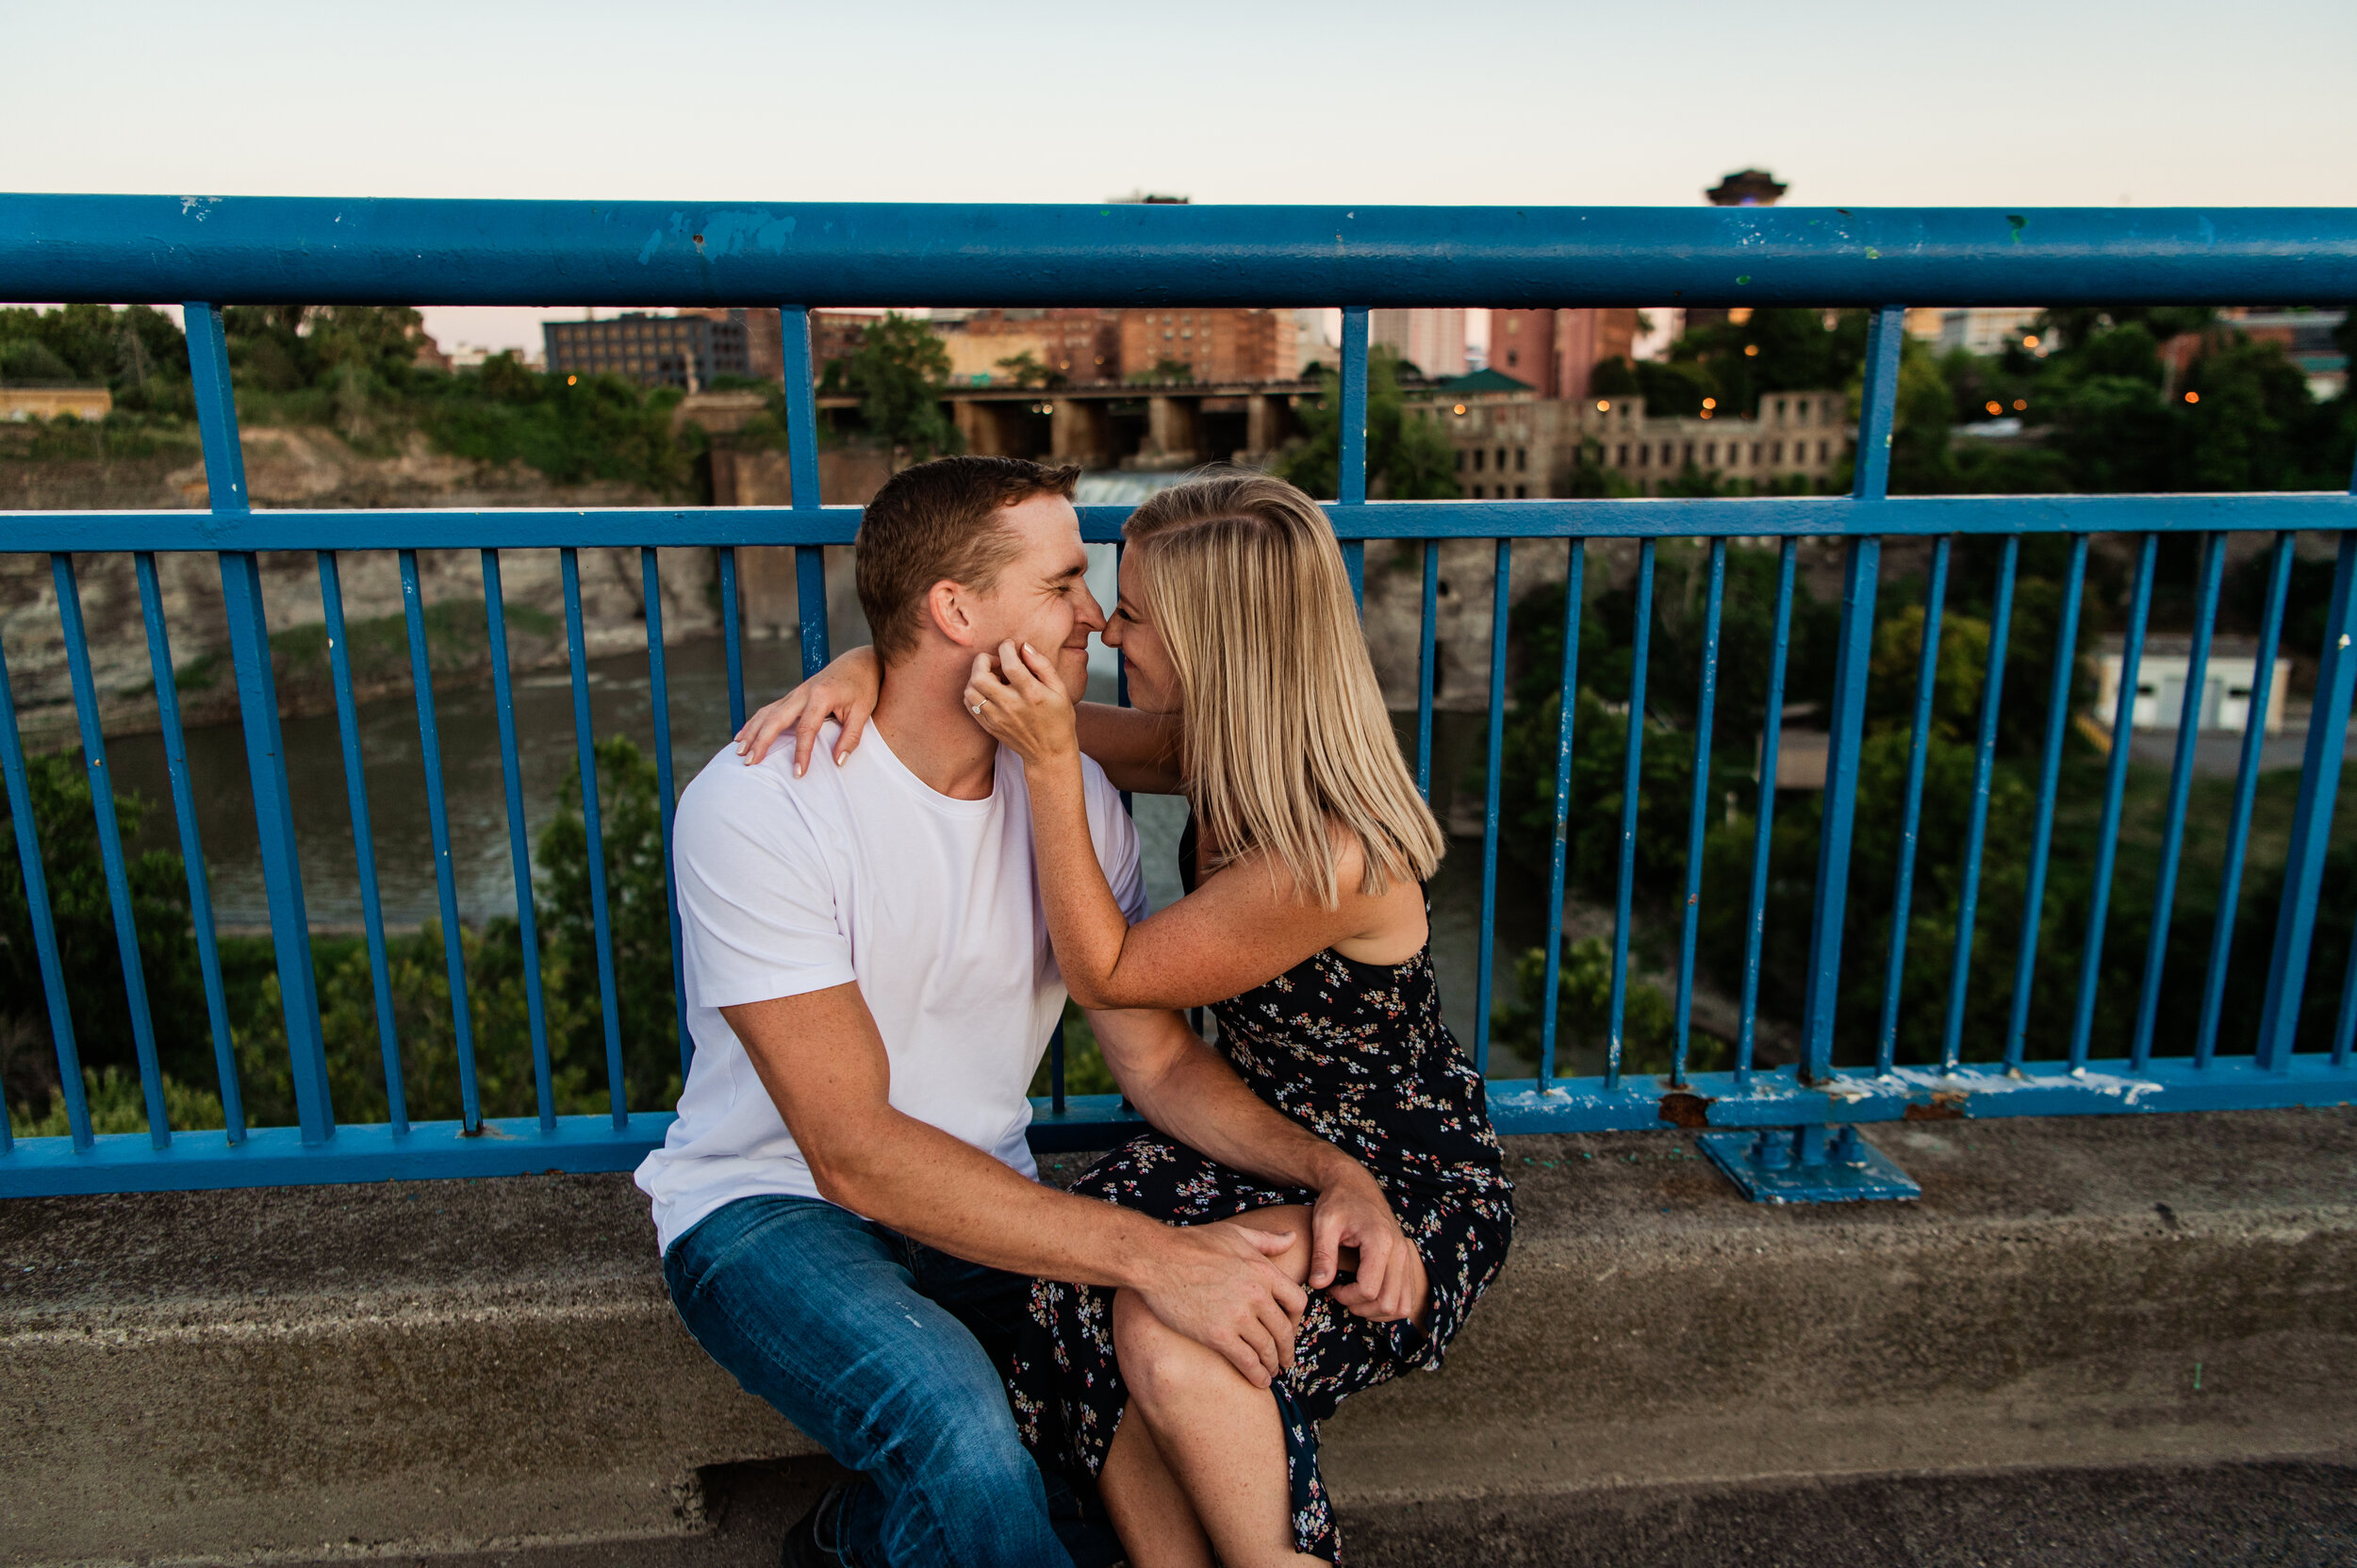 Genesee_Brew_House_High_Falls_Rochester_Engagement_Session_JILL_STUDIO_Rochester_NY_Photographer_5920.jpg